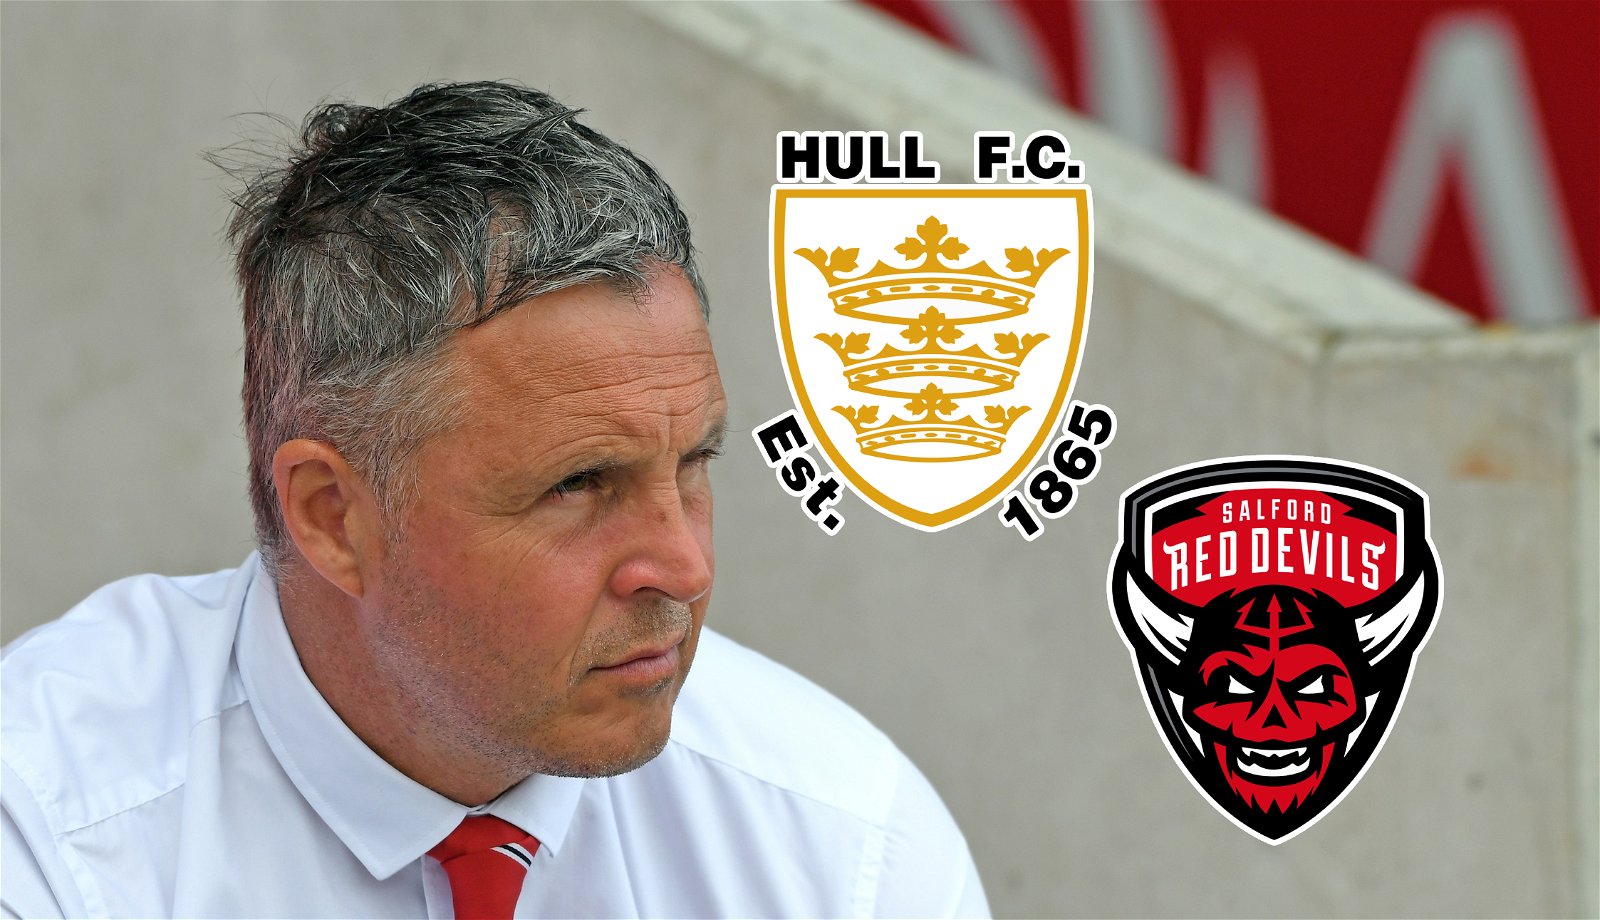 Paul Rowley in an image next to the badges of Hull FC and Salford Red Devils